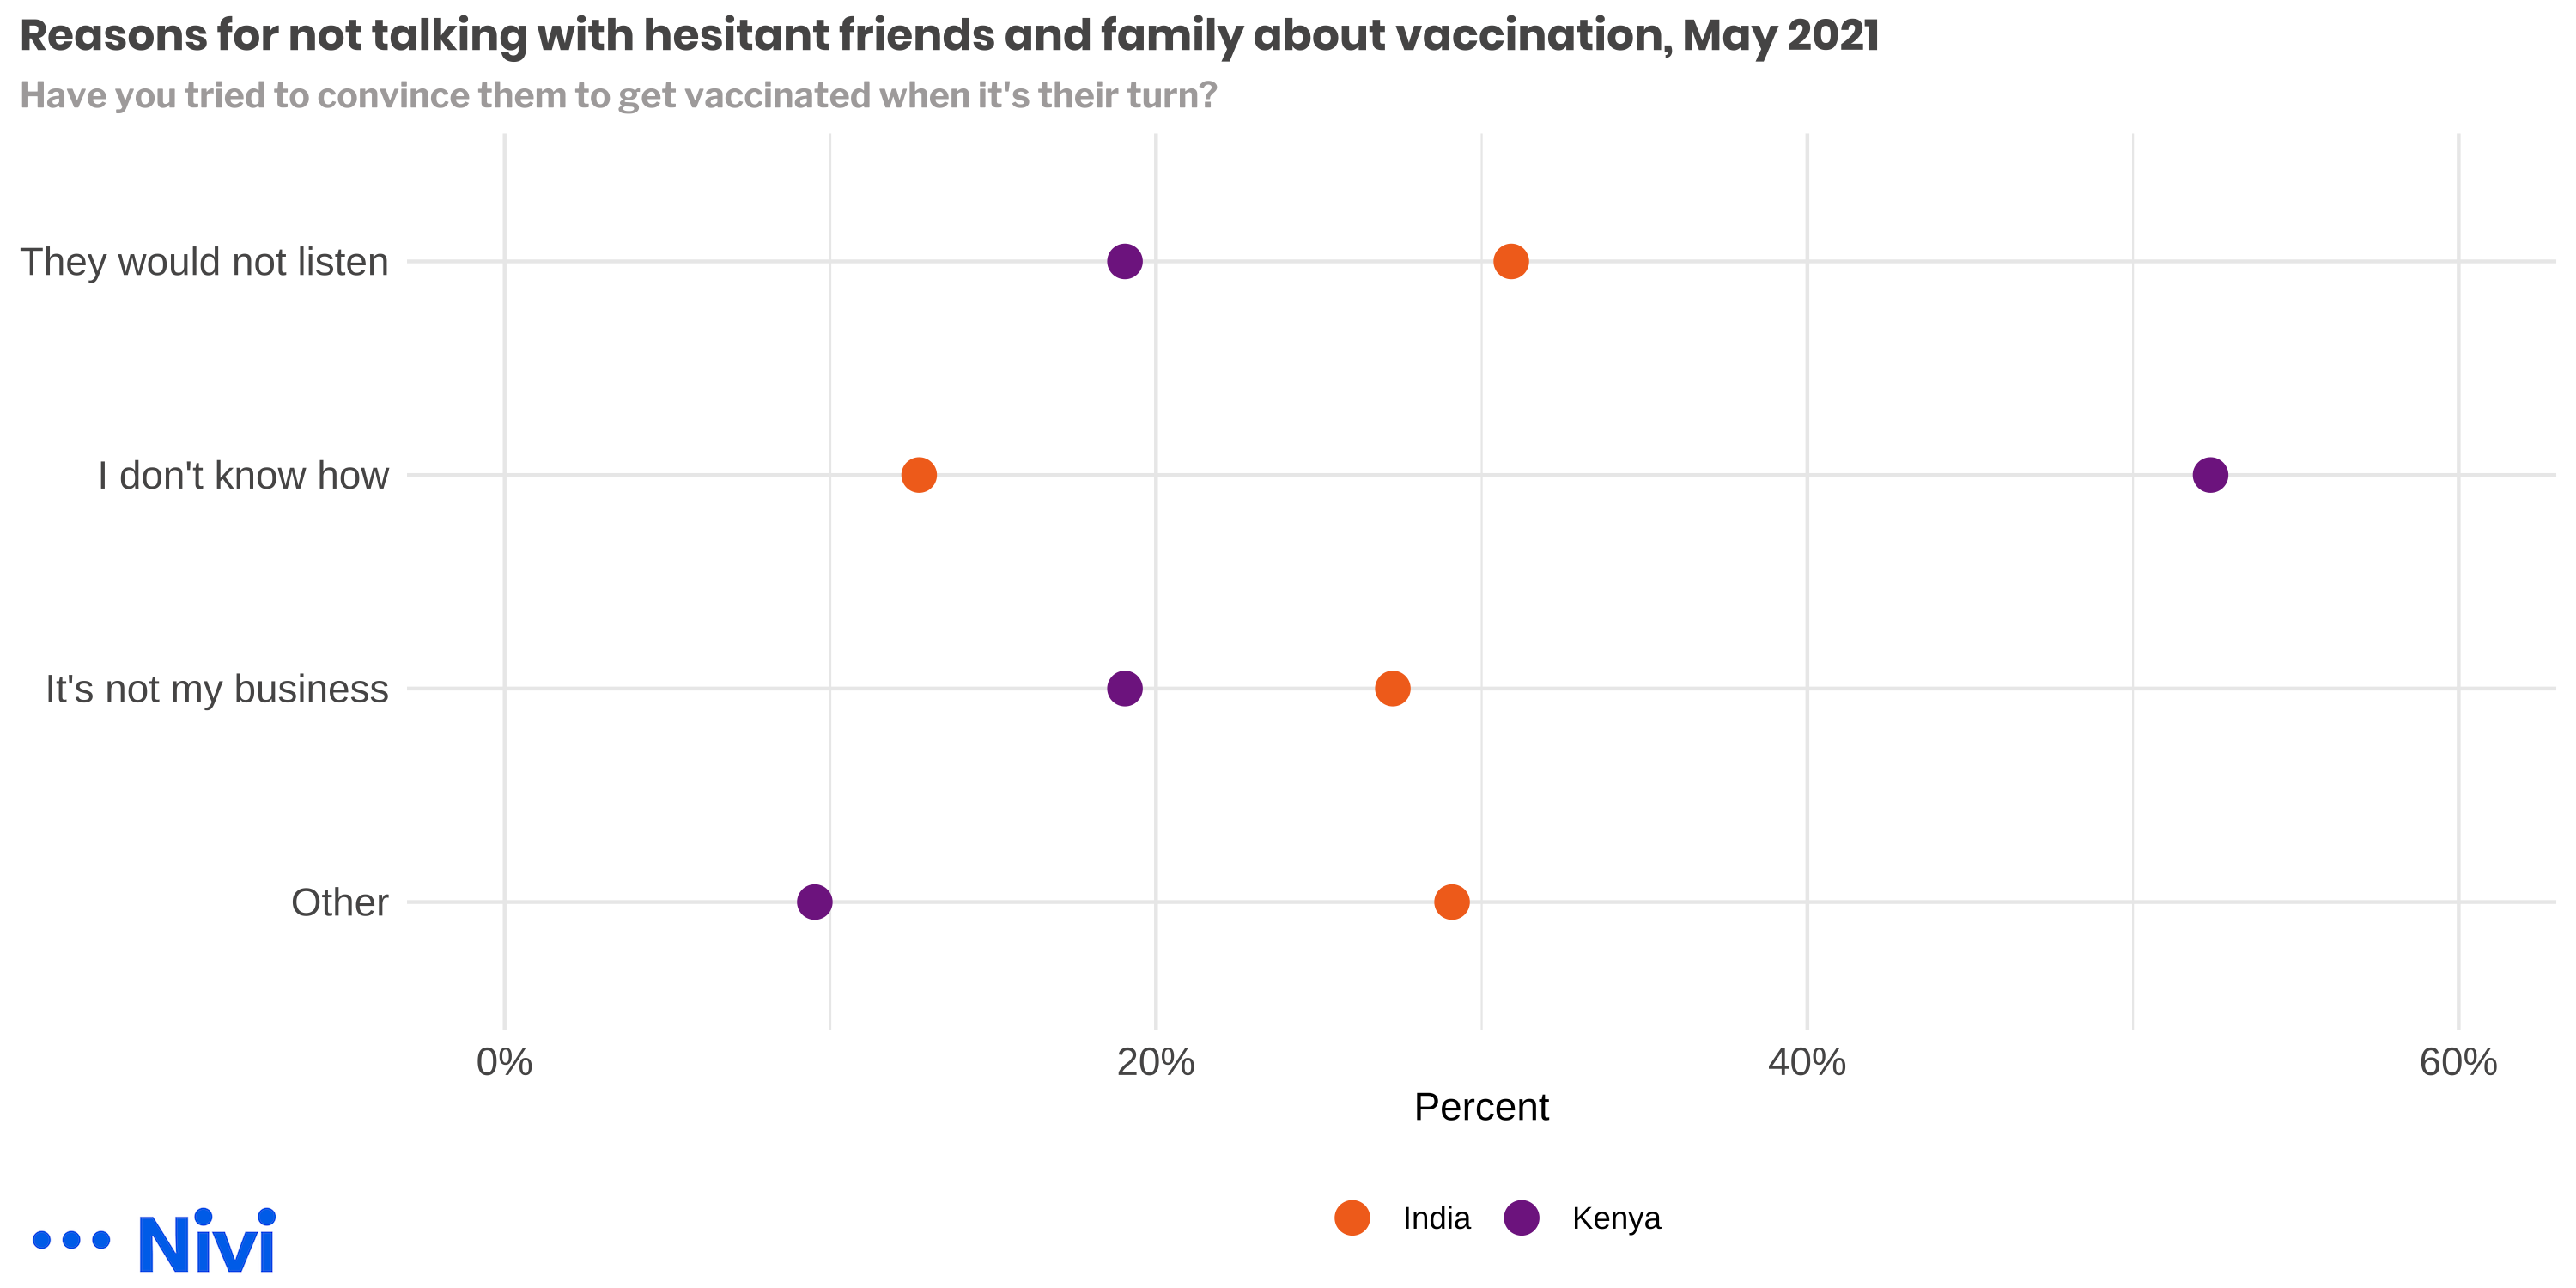 Reasons for not talking with hesitant friends and family about vaccination, May 2021